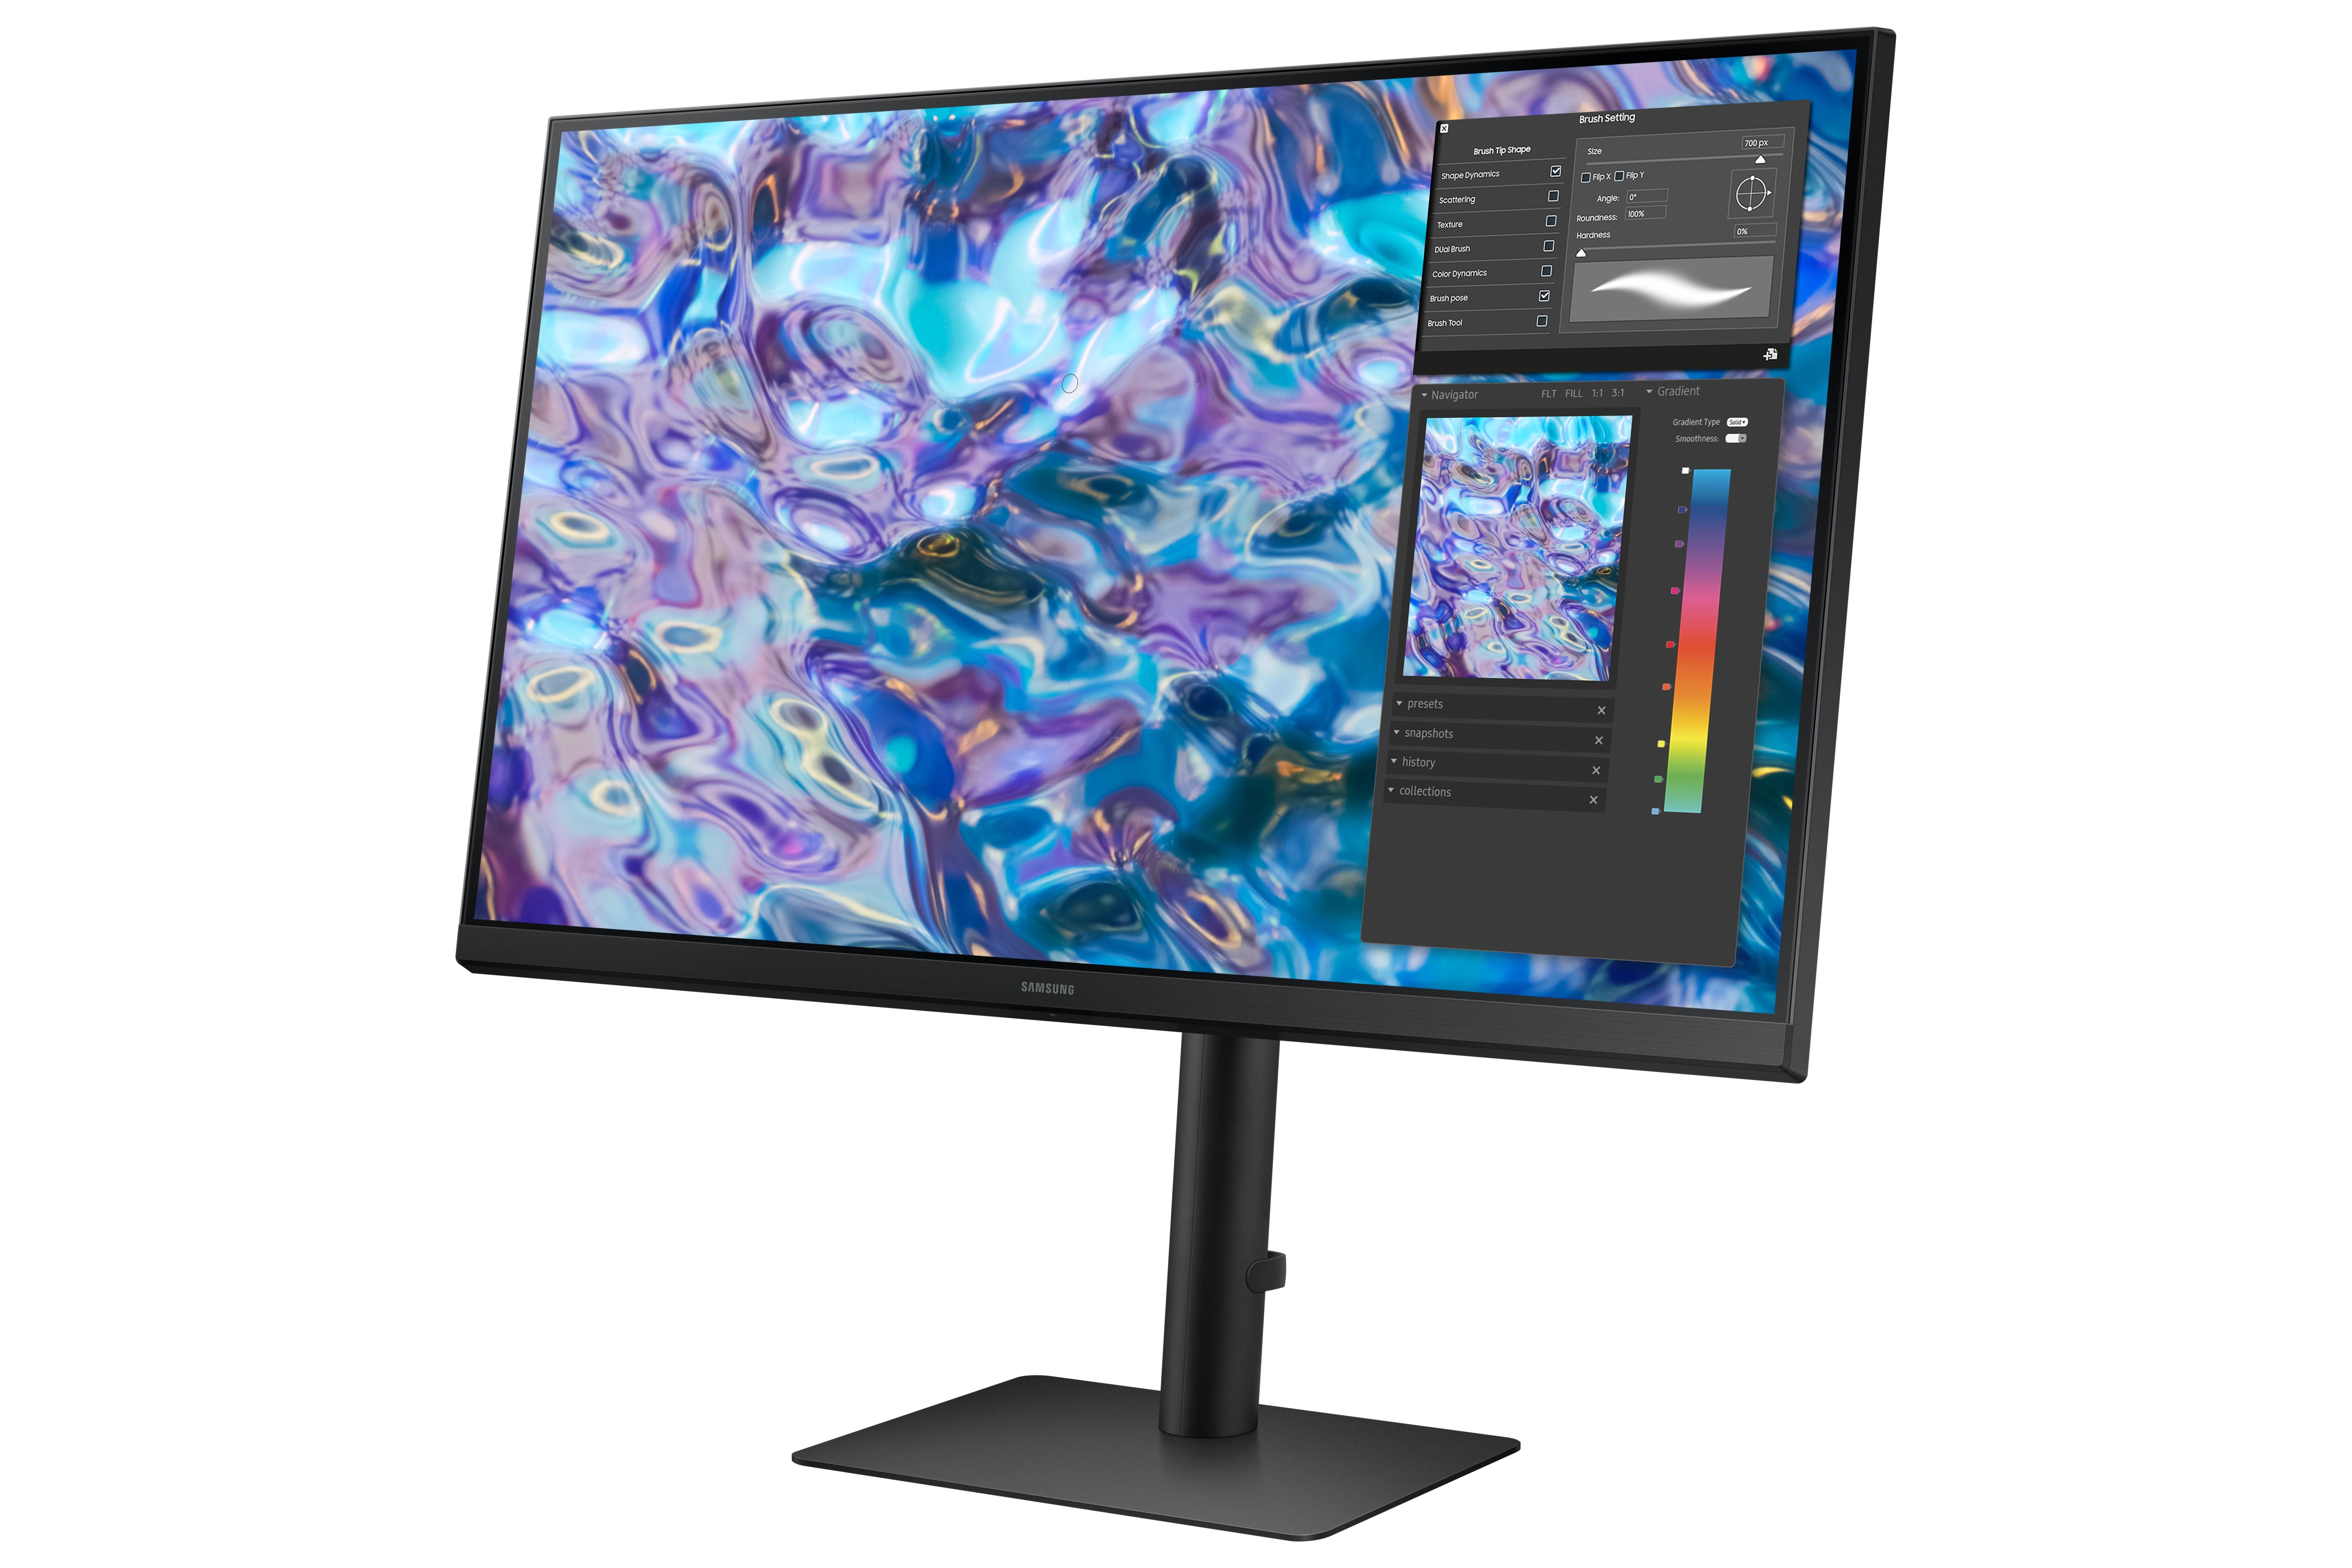 Samsung QHD Monitor with IPS panel - 27 Inches